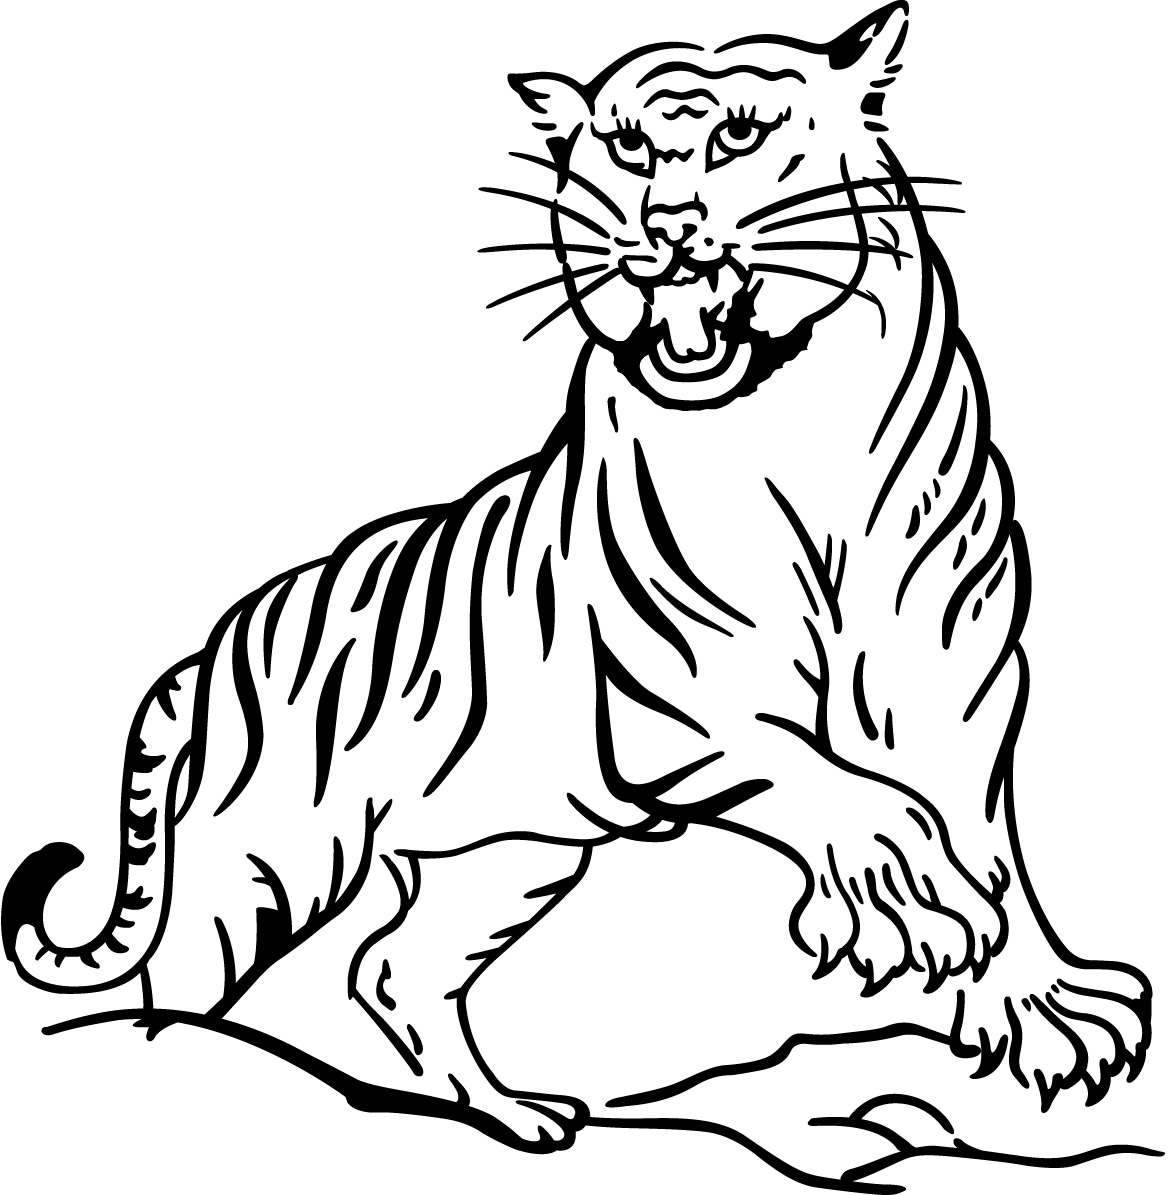  Tiger Coloring Pages 2